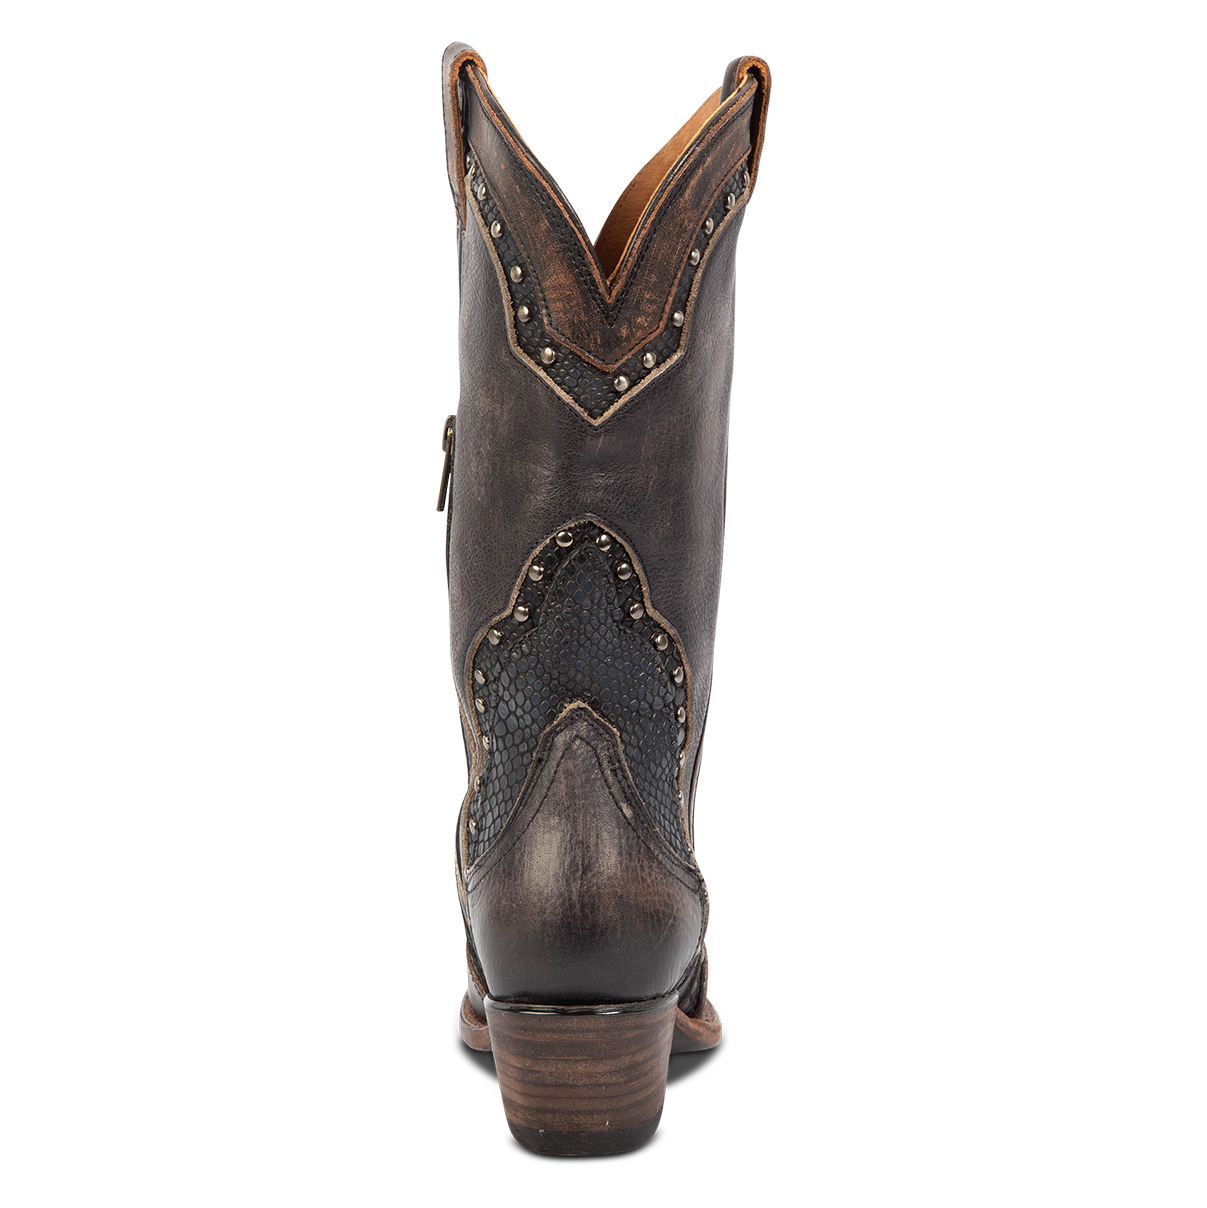 Back view showing back dip and low heel with embossed leather detailing on FREEBIRD women's Warner black leather western cowboy boot